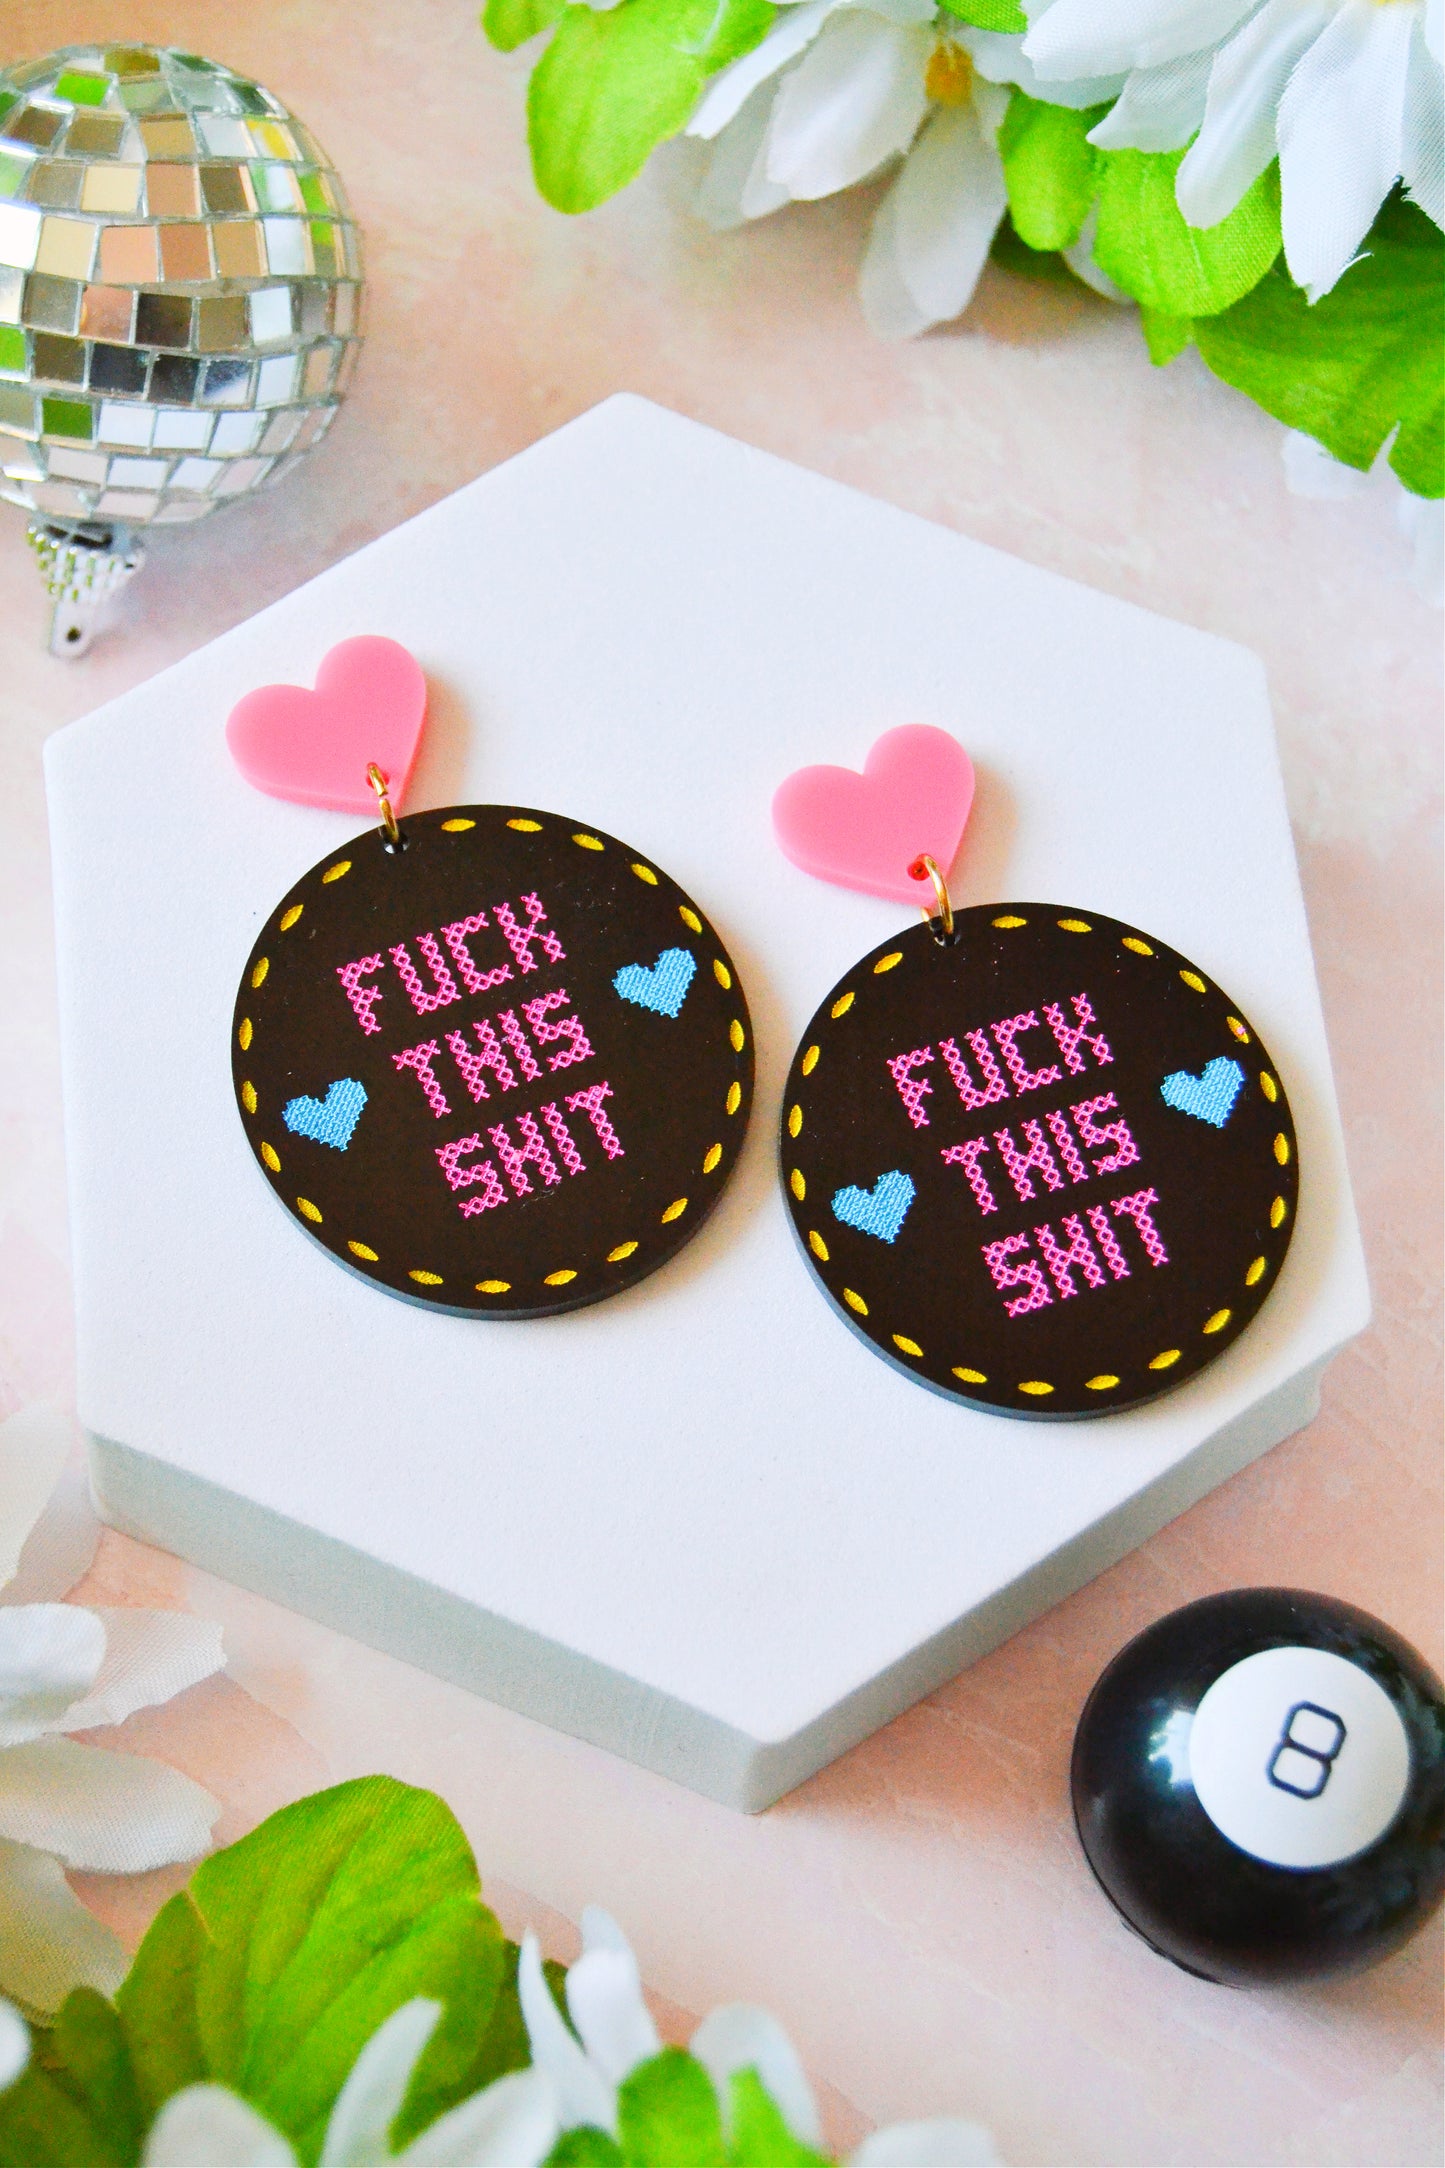 Fuck This Shit Cross Stitch Earrings